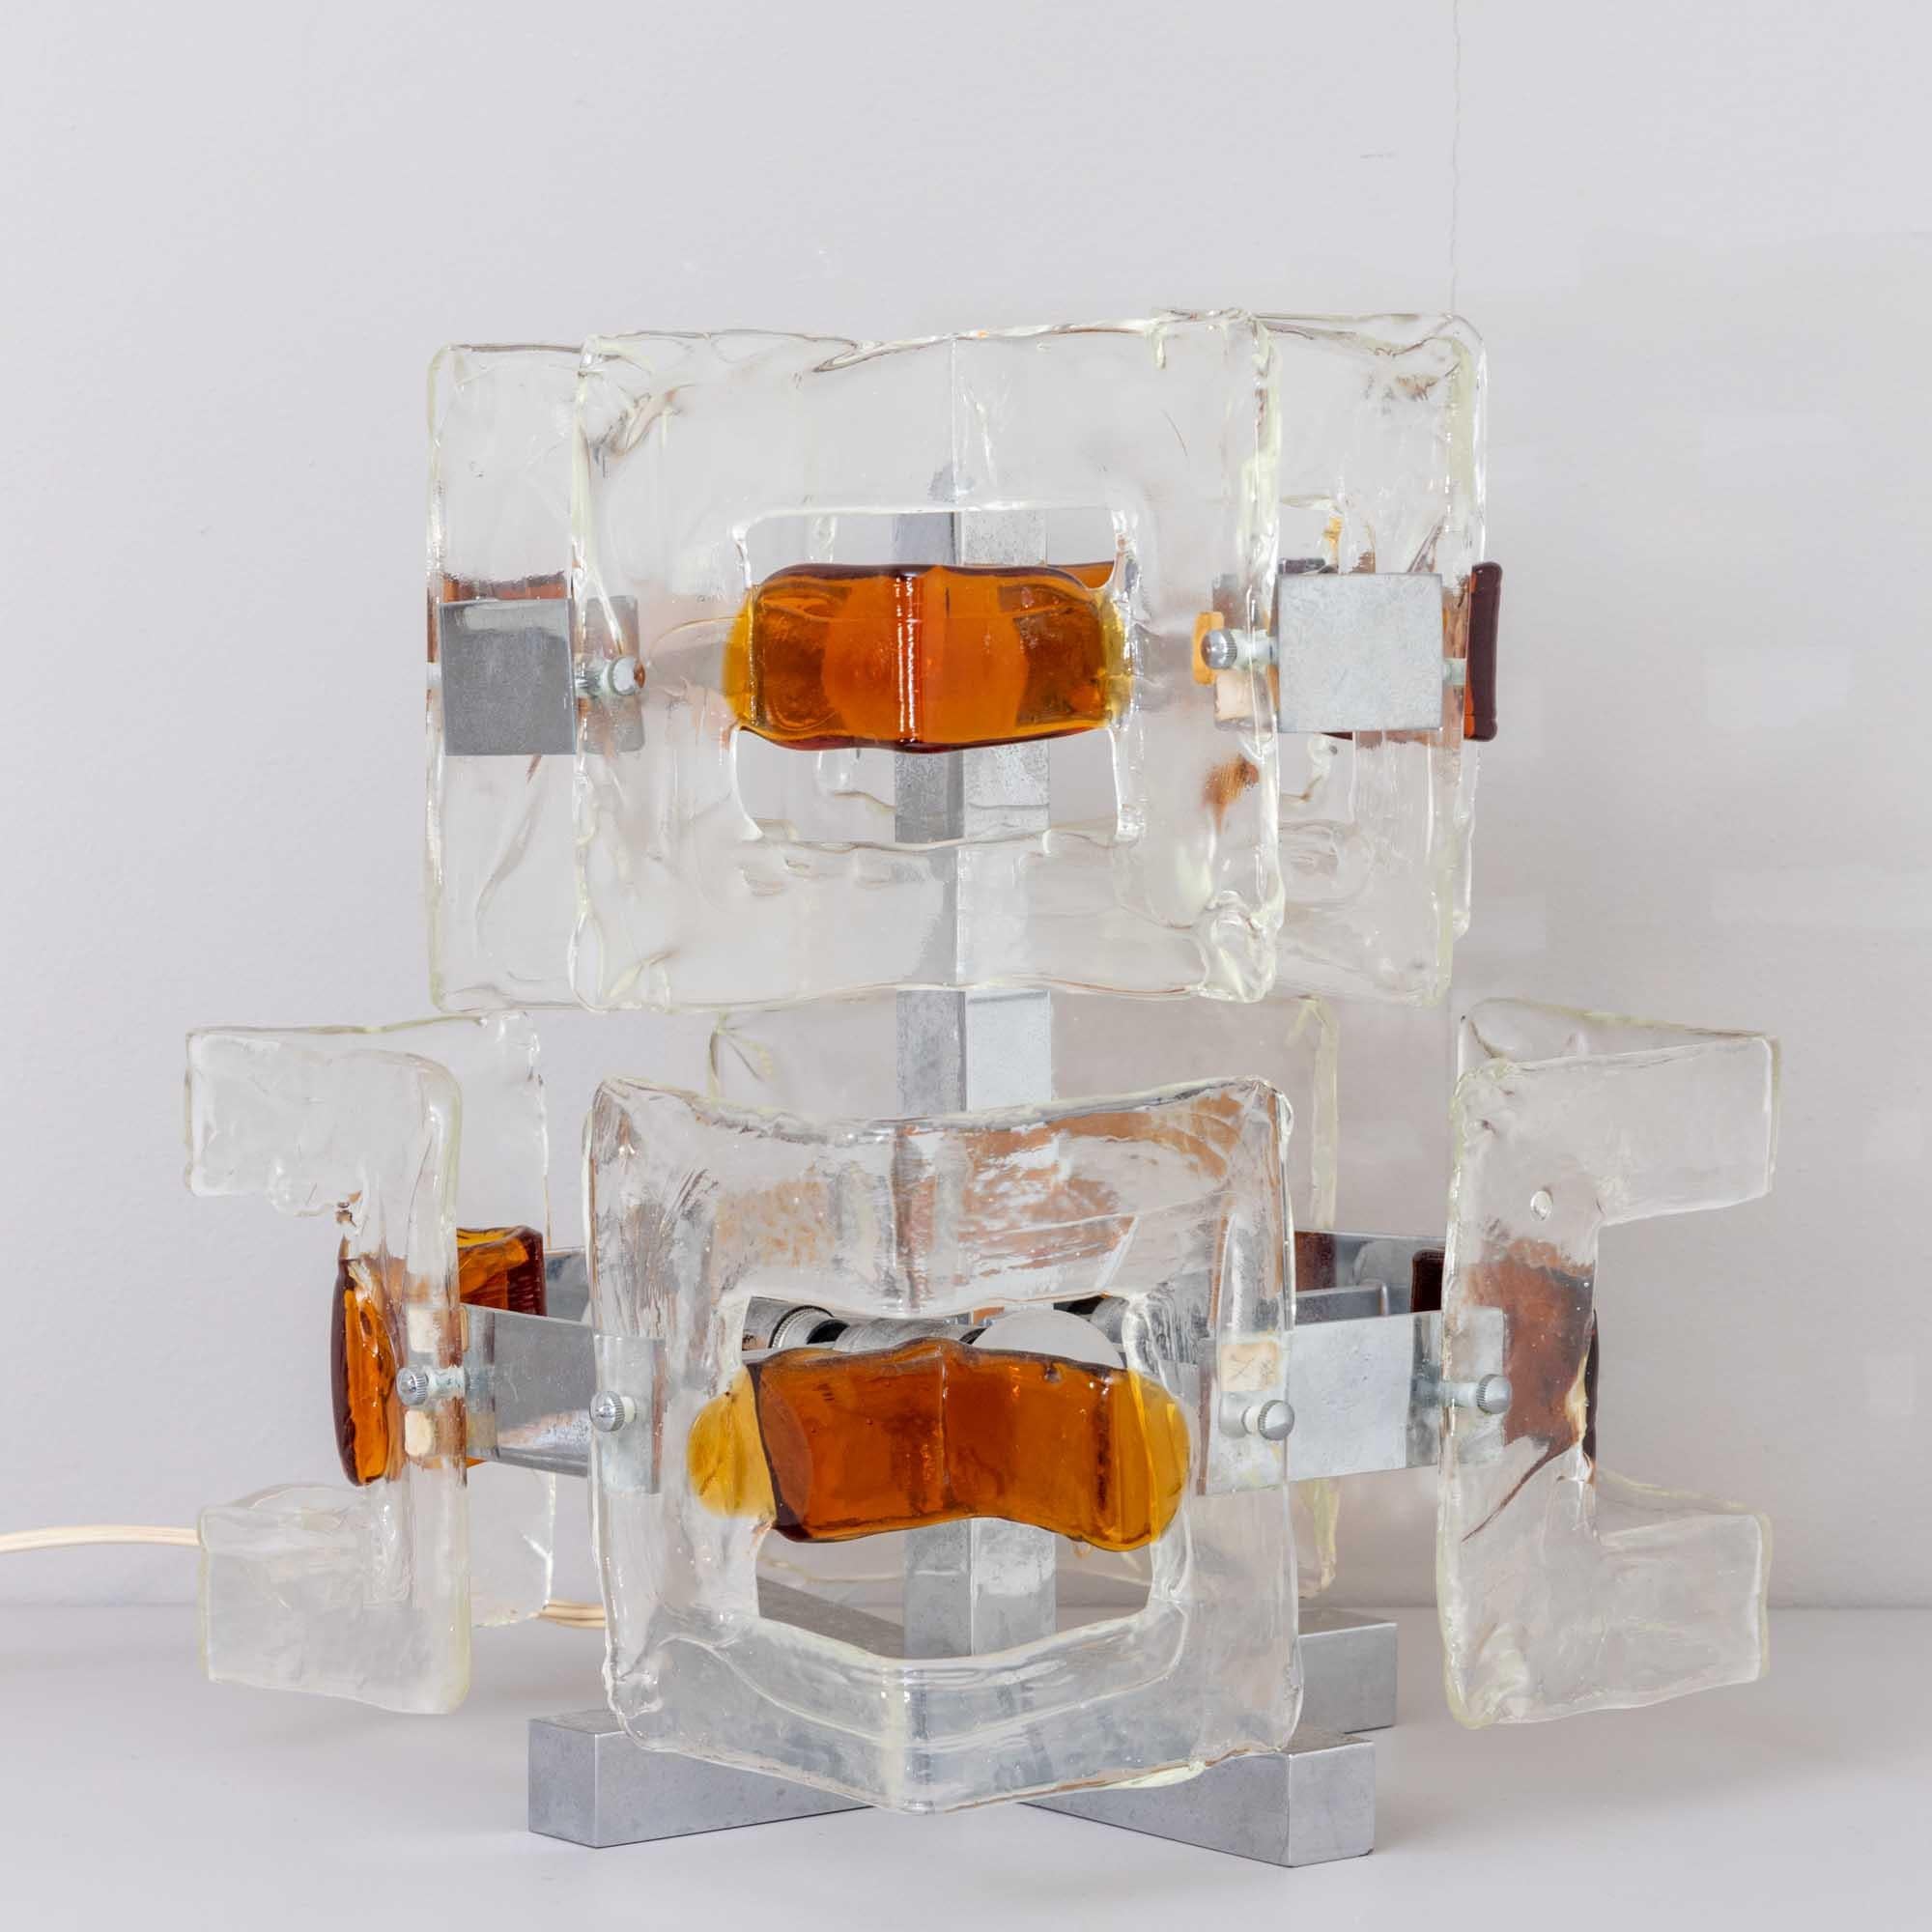 Illuminated Italian Art Glass sculptural table lamp.
Clear and amber glass forms mounted on a chrome plated metal frame.